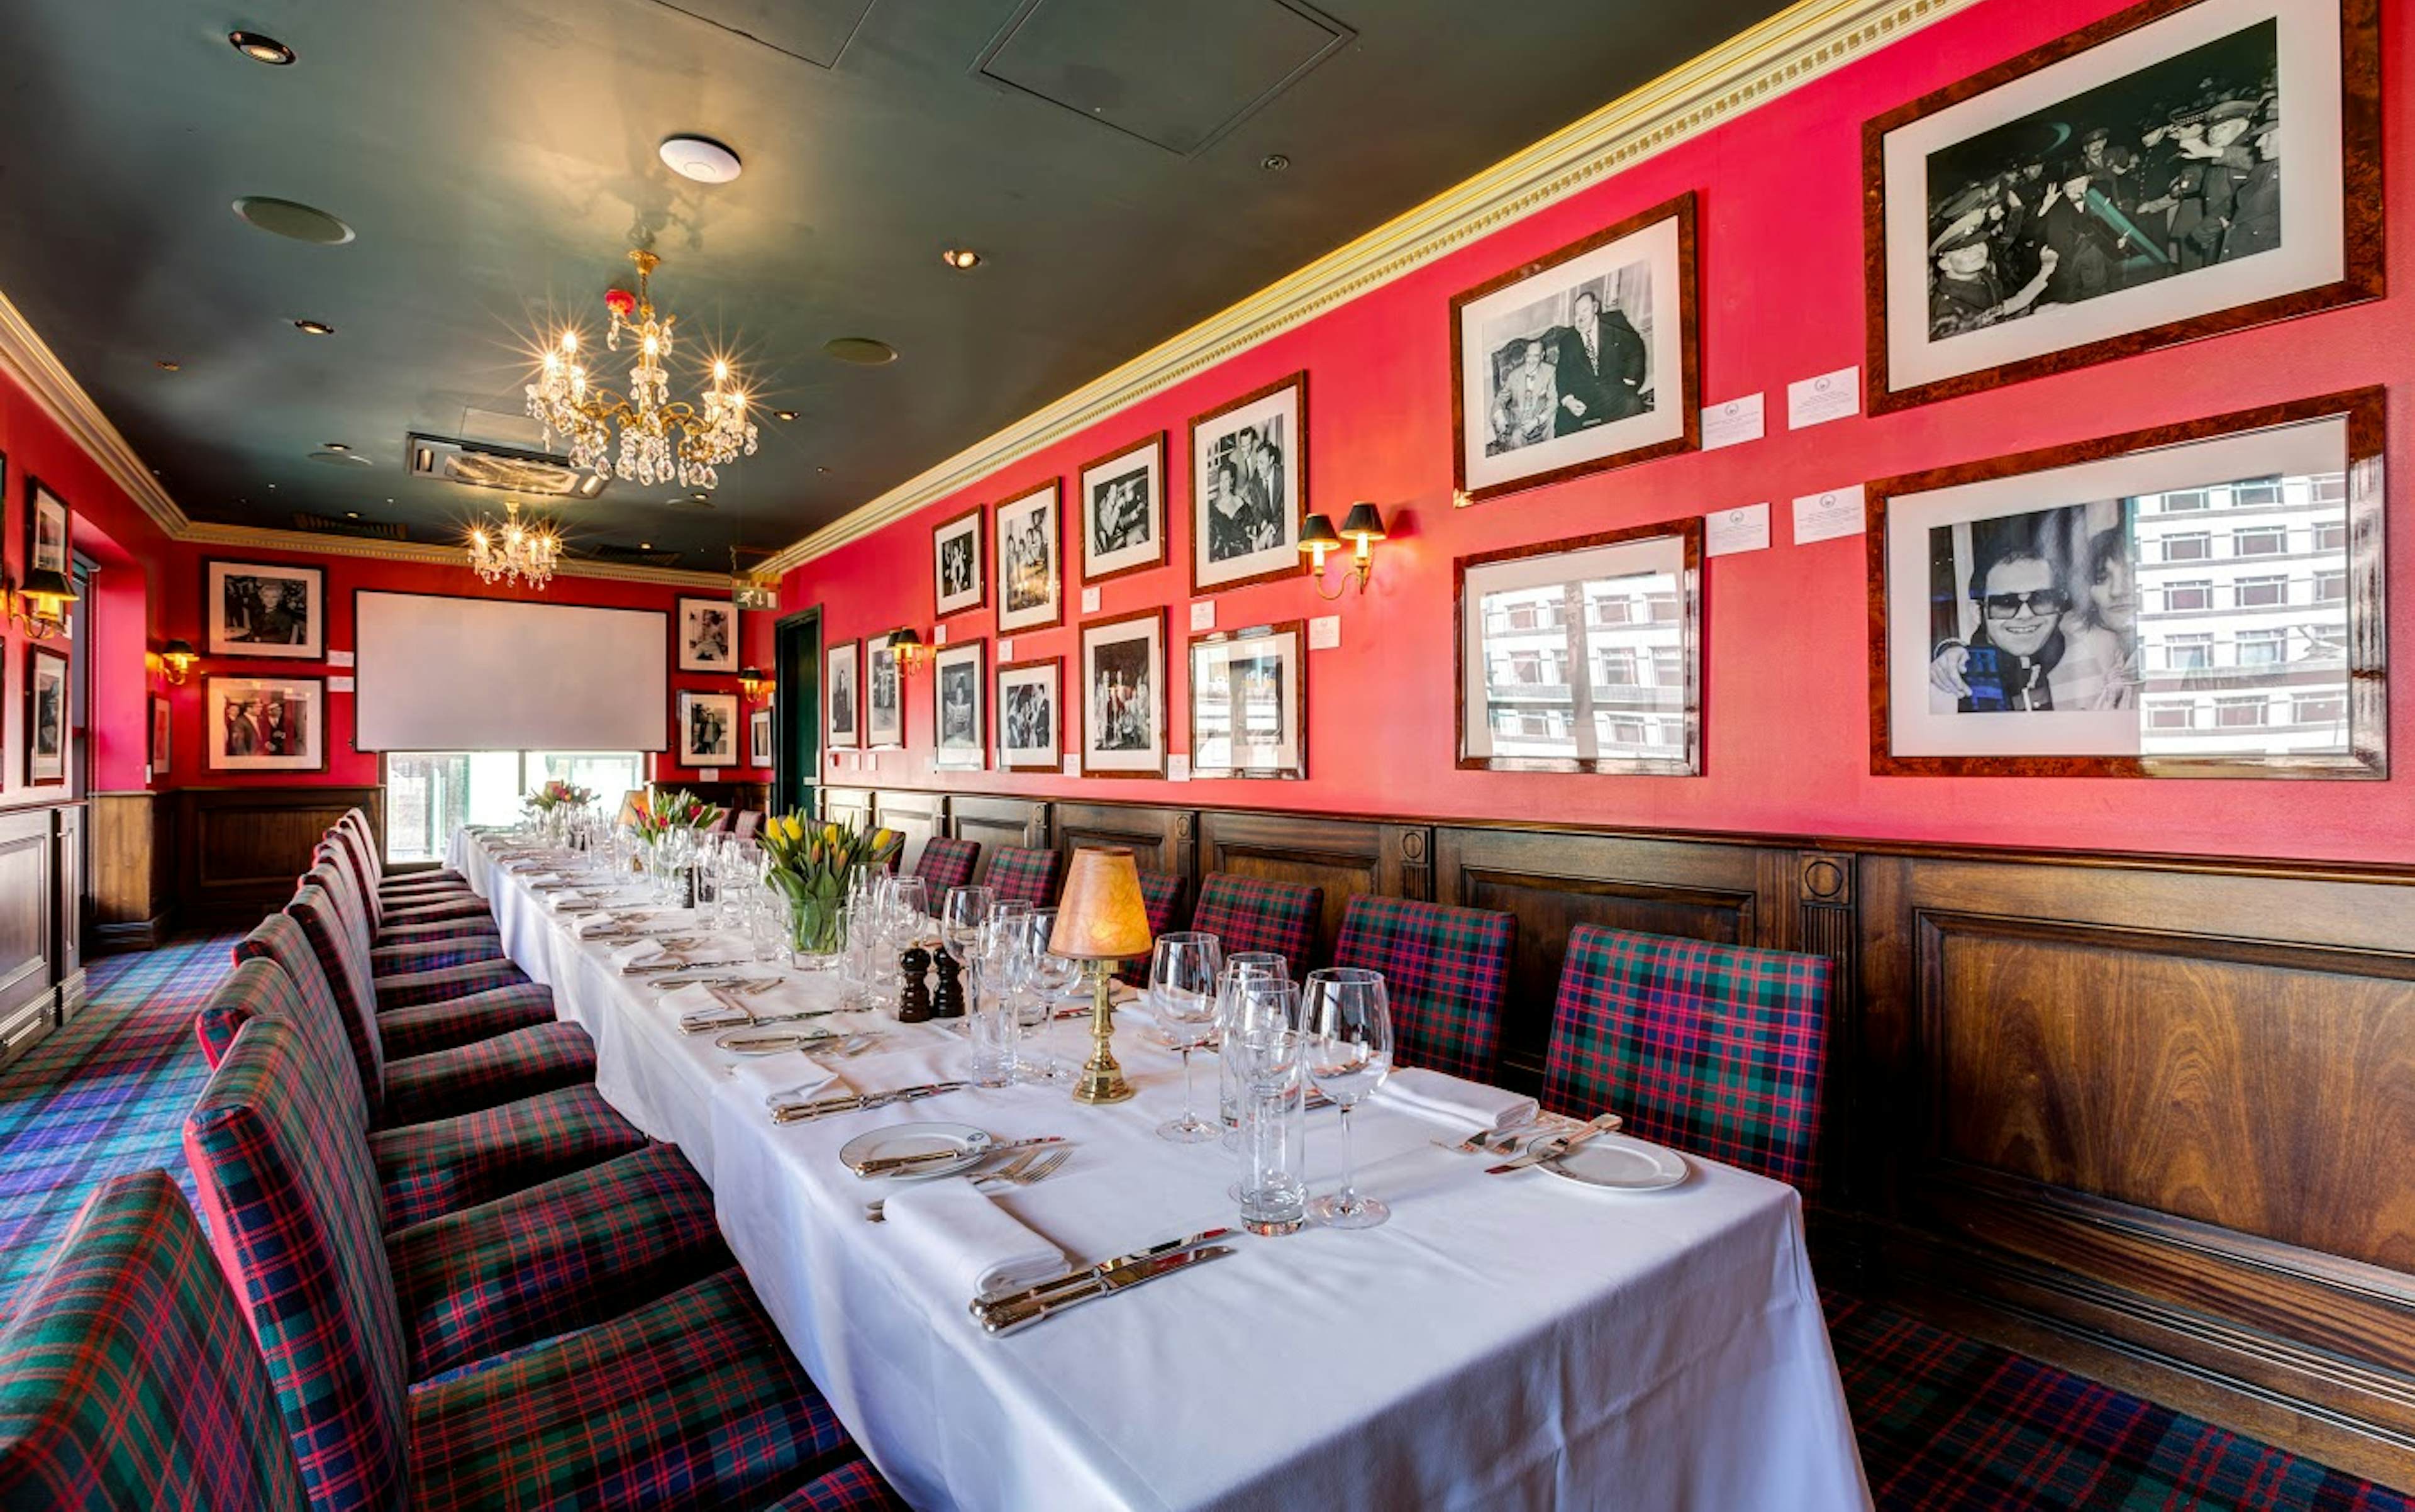 Boisdale of Canary Wharf - The Gallery Room image 1